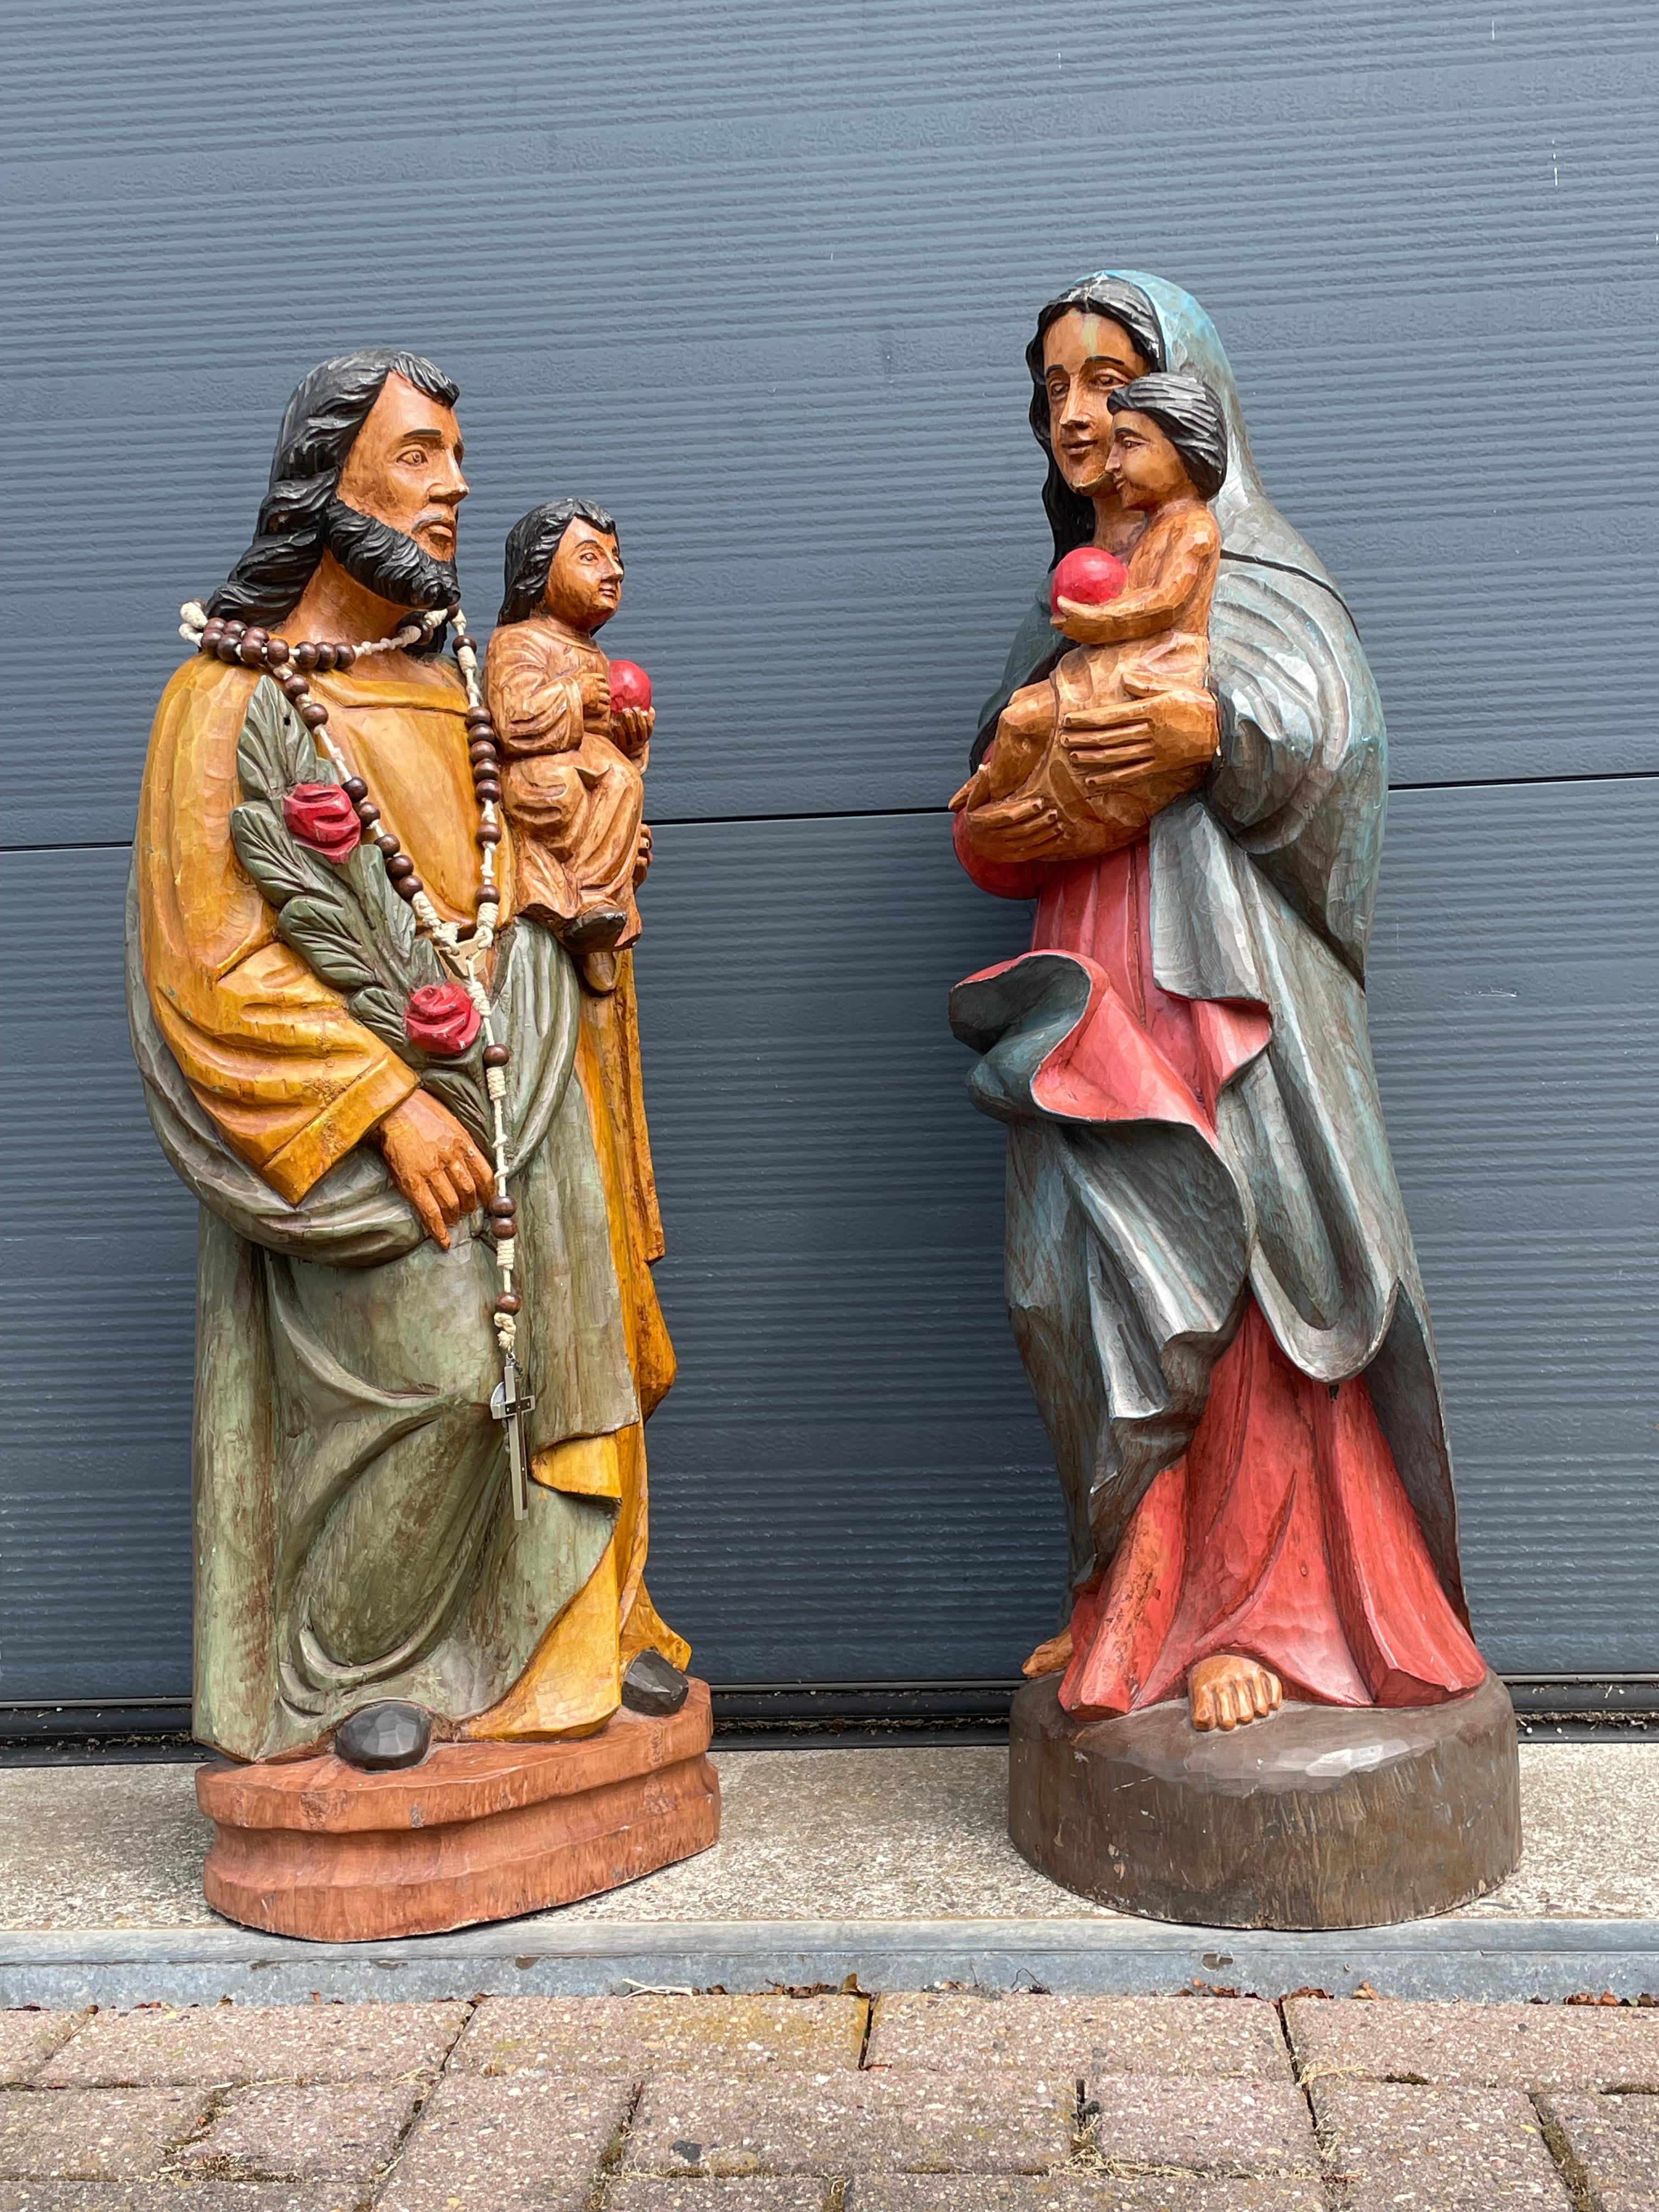 Large Pair of Hand Carved Wooden Mary & Joseph Sculptures, Both with Child Jesus im Angebot 8